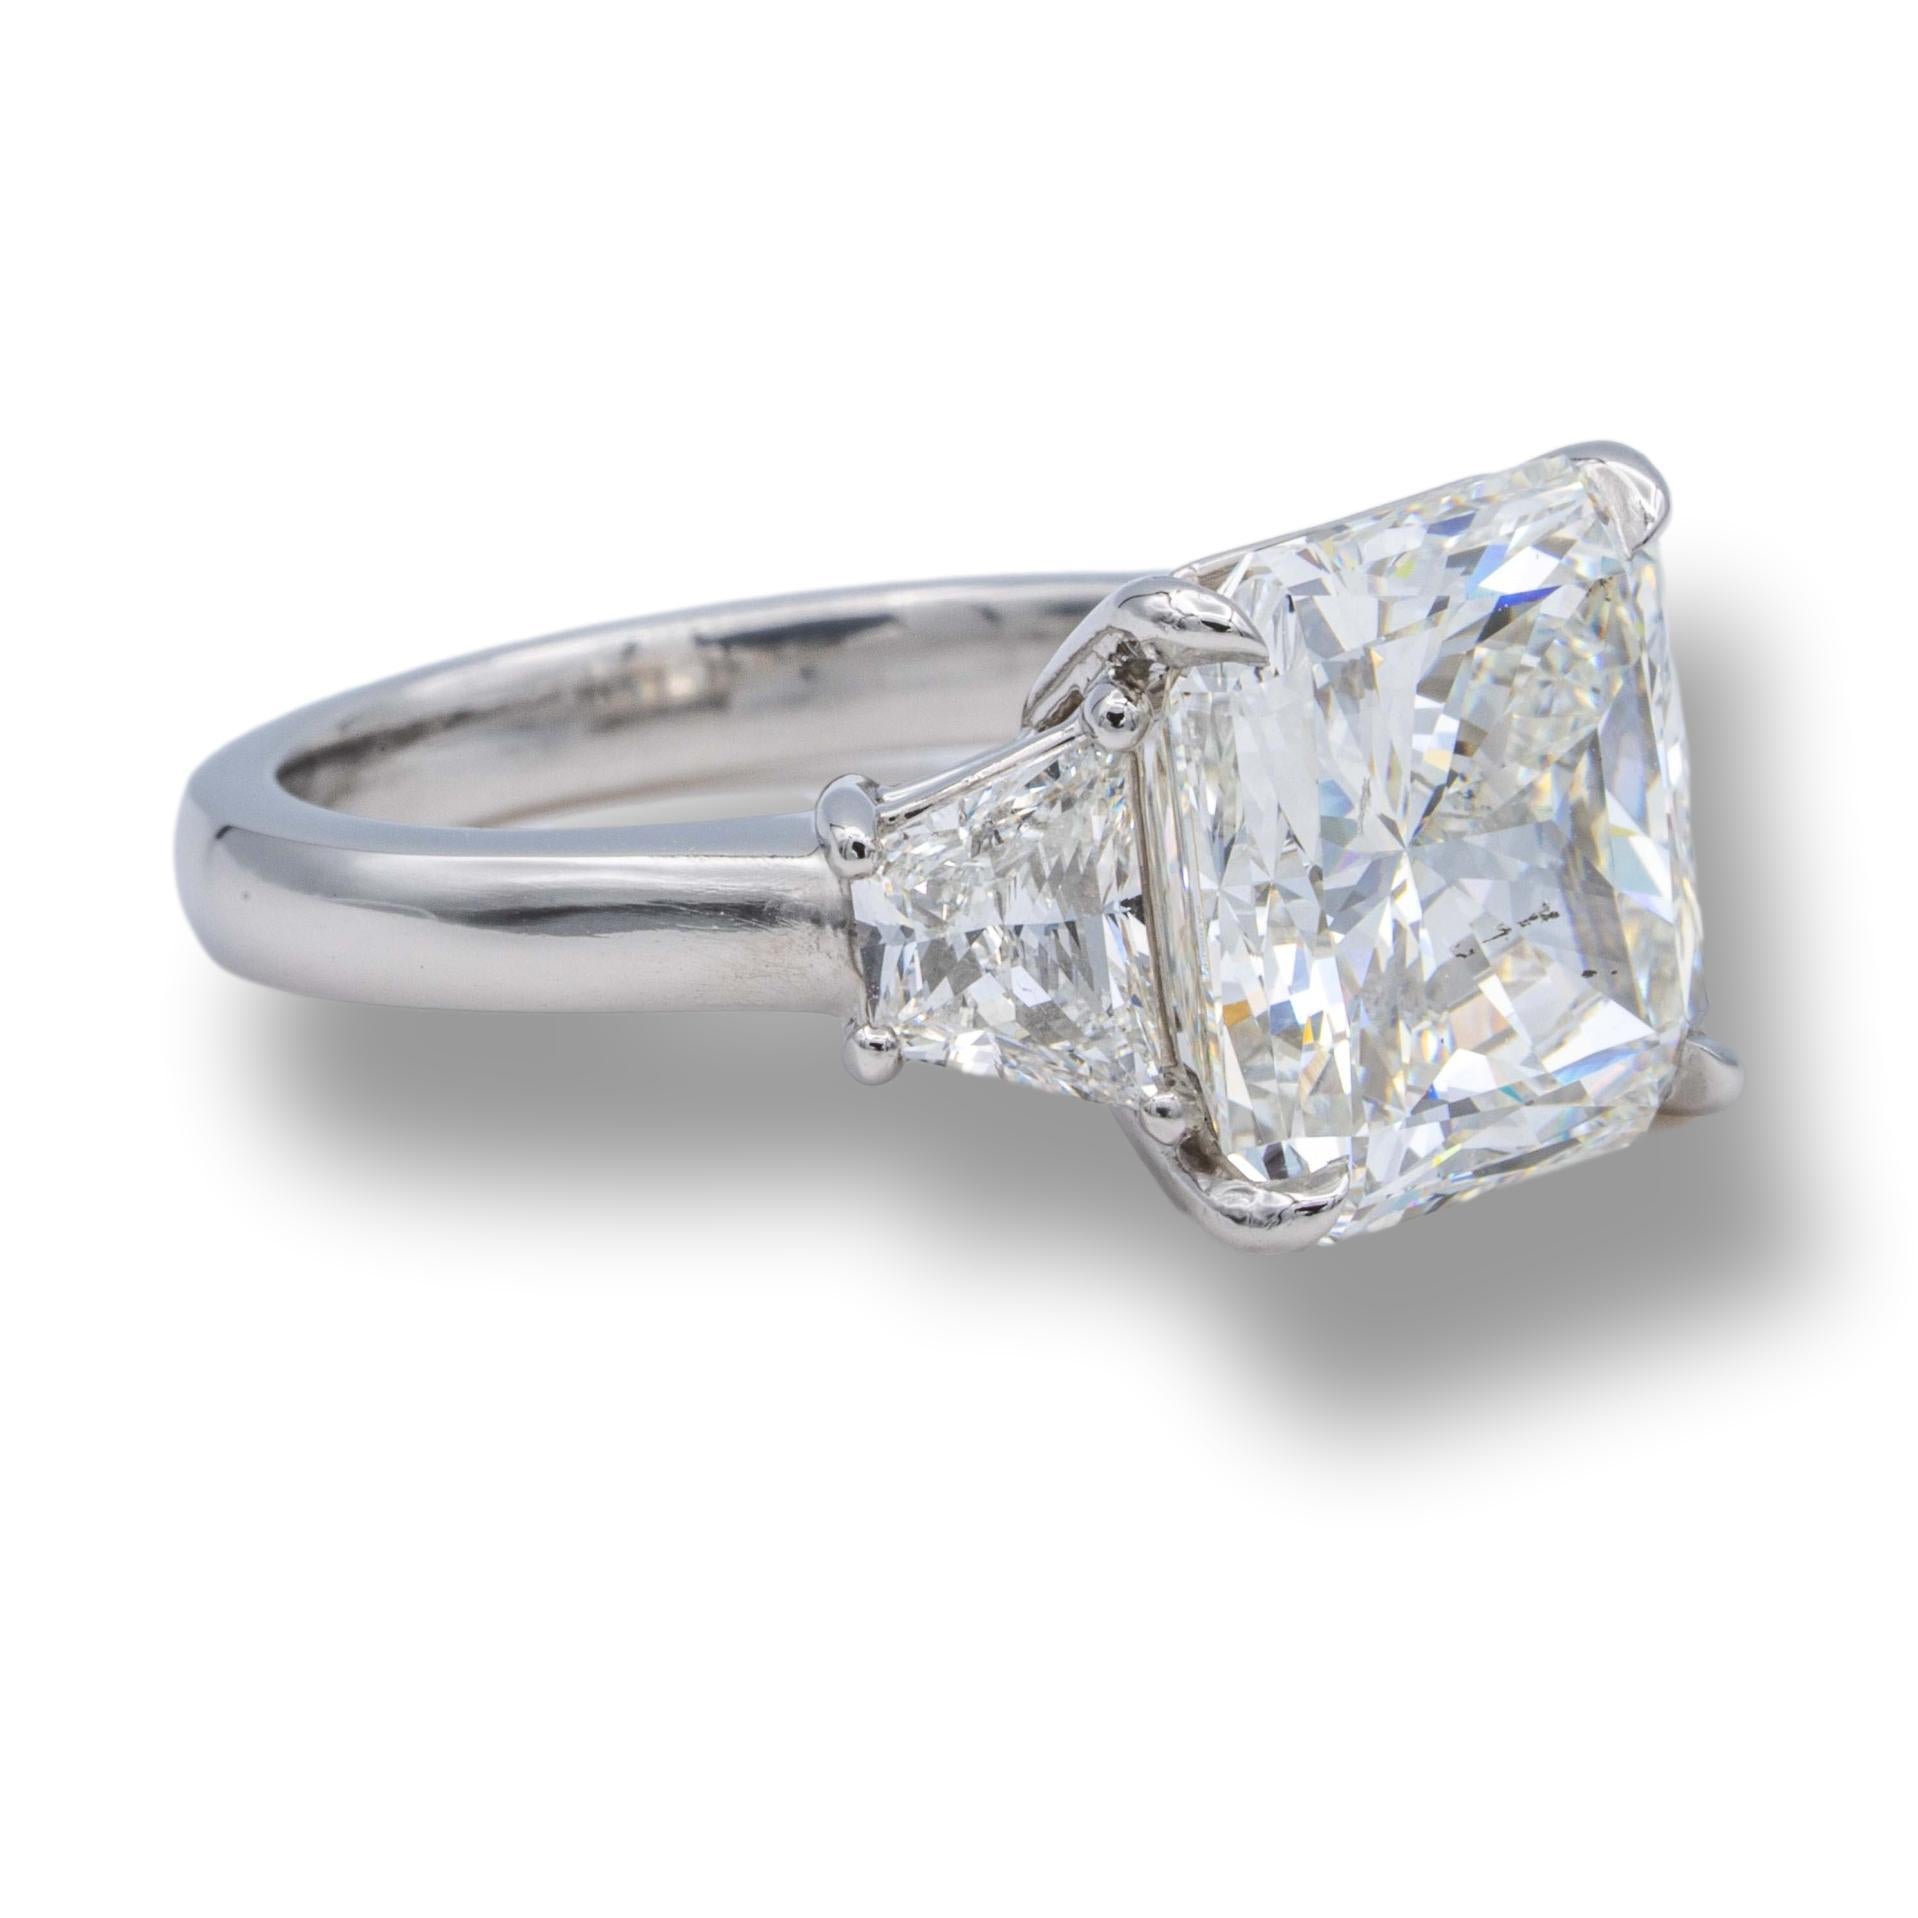 Three stone engagement ring finely crafted in a platinum basket setting with an open gallery showcasing a 5.04 ct radiant cut diamond center I color SI2 clarity flanked by 2 trapezoid diamonds weighing 0.95 carats approximately, I color , VS2